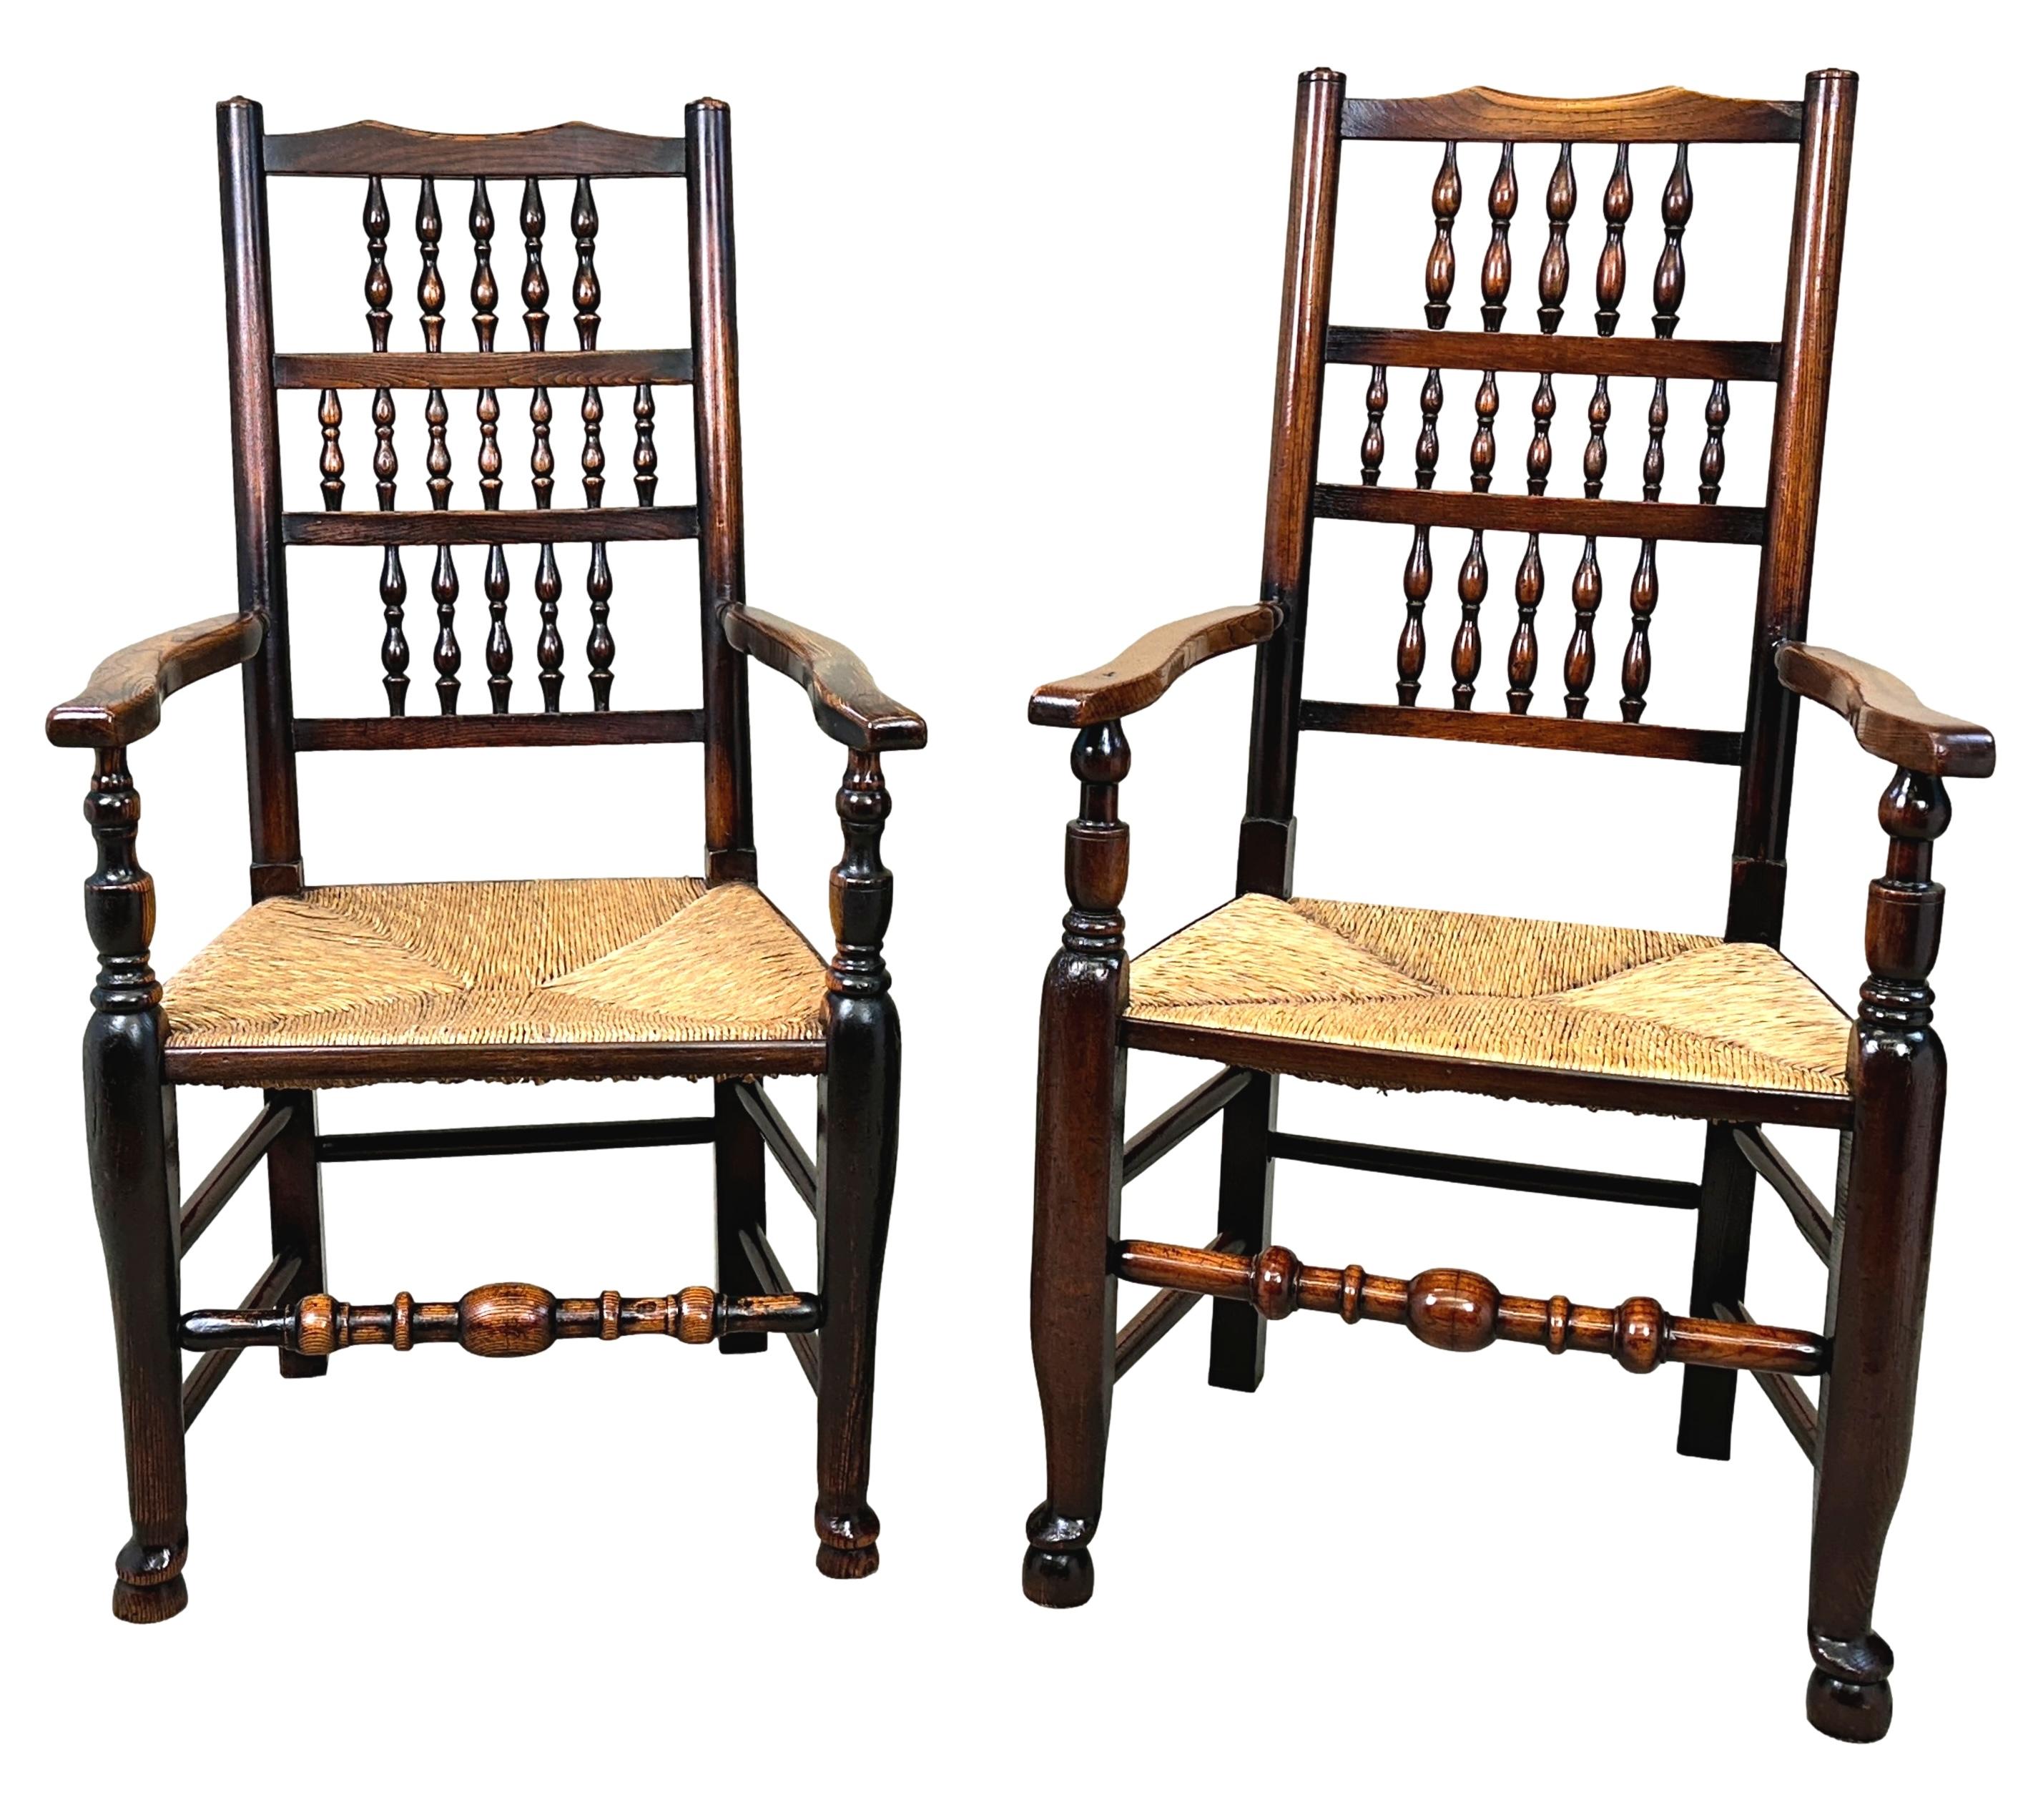 An Extremely Attractive And Charming Matched Harlequin Set Of 8 Early 19th Century, Georgian, Ash And Elm Farmhouse Kitchen Dining Chairs, Consisting Of 6 Single Chairs And 2 Armchairs, Having Elegant Spindlebacks Over Rushed Seats Raised On Elegant